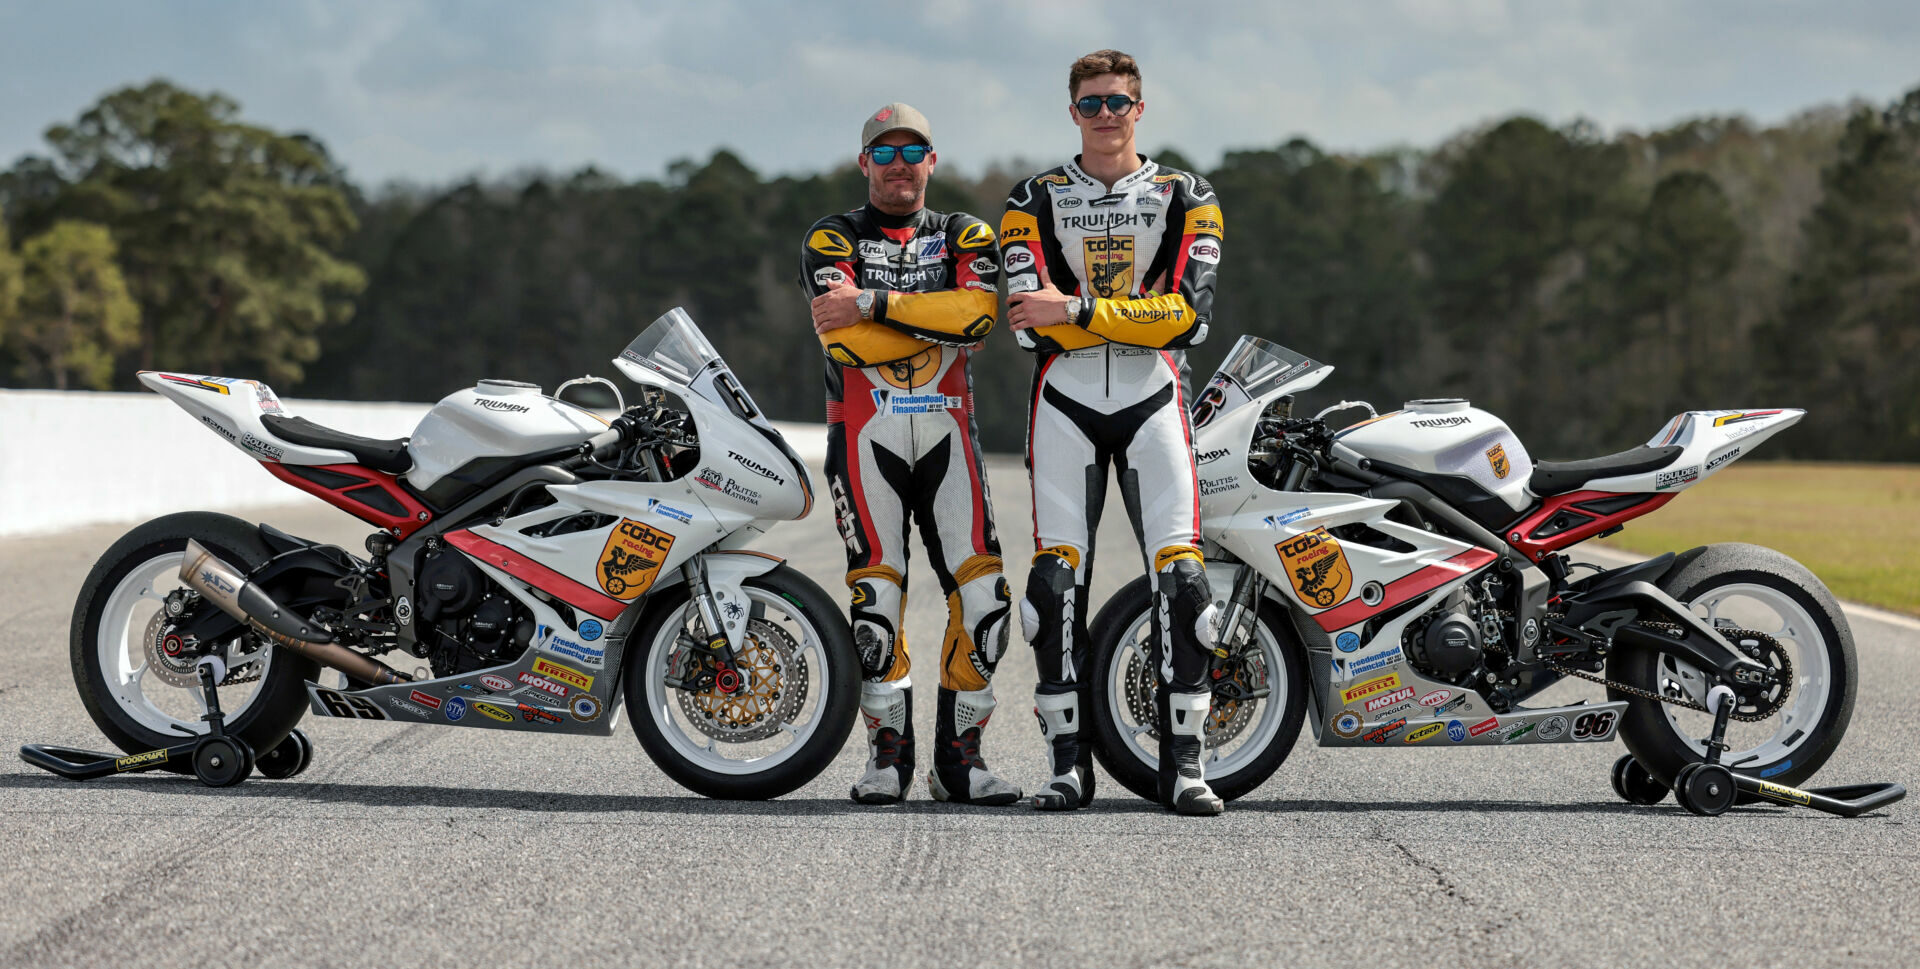 Four-time Daytona 200 winner Danny Eslick (left) and two-time and defending Daytona 200 Champion Brandon Paasch (right) on their TOBC Racing Triumph Street Triple RS racebikes. Photo courtesy Triumph.